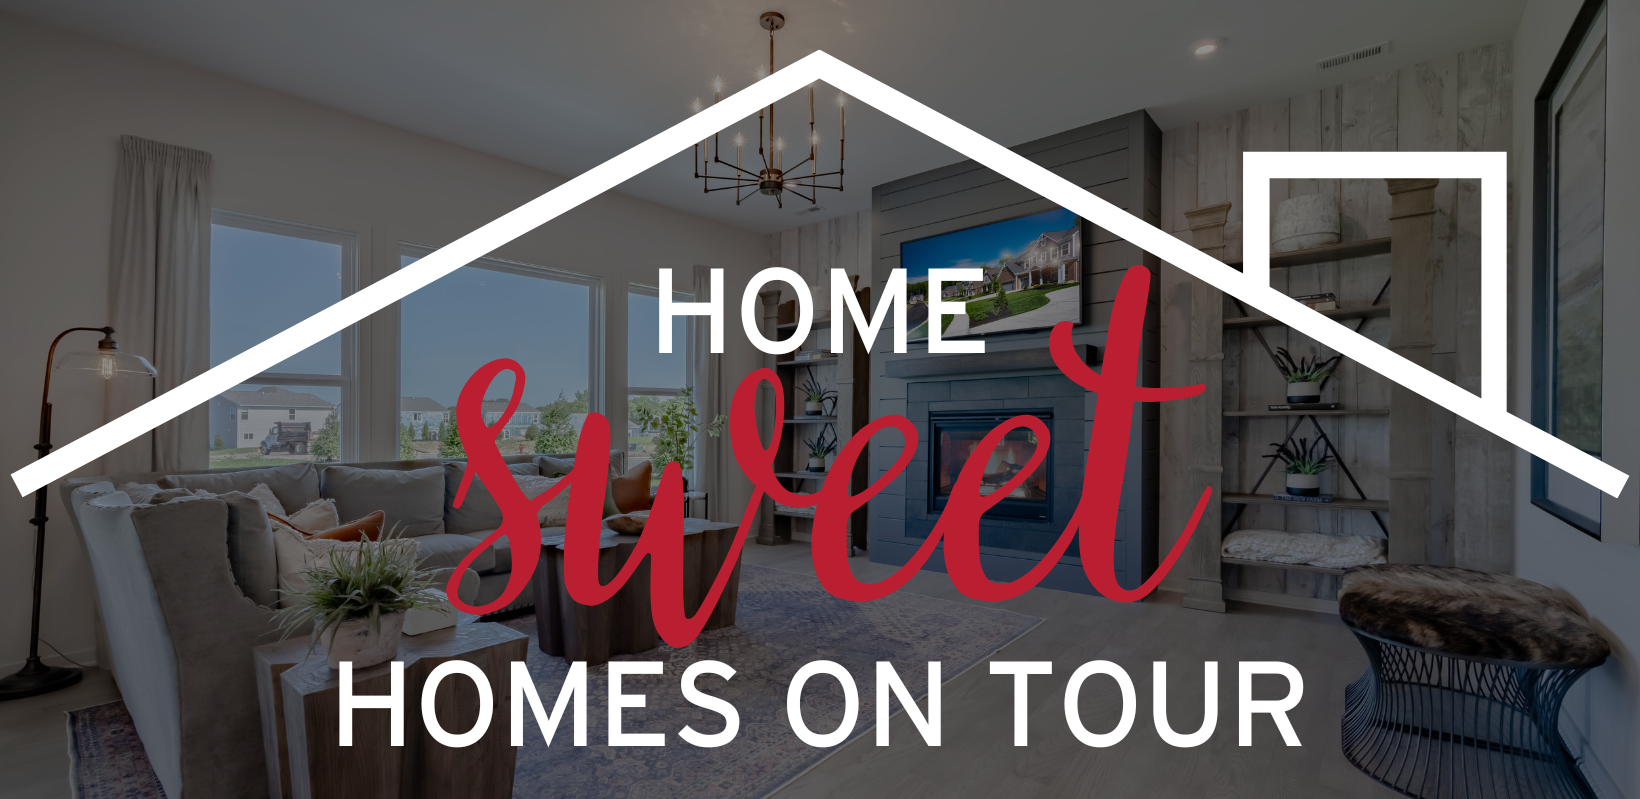 Home Sweet Homes on Tour is back in Louisville!